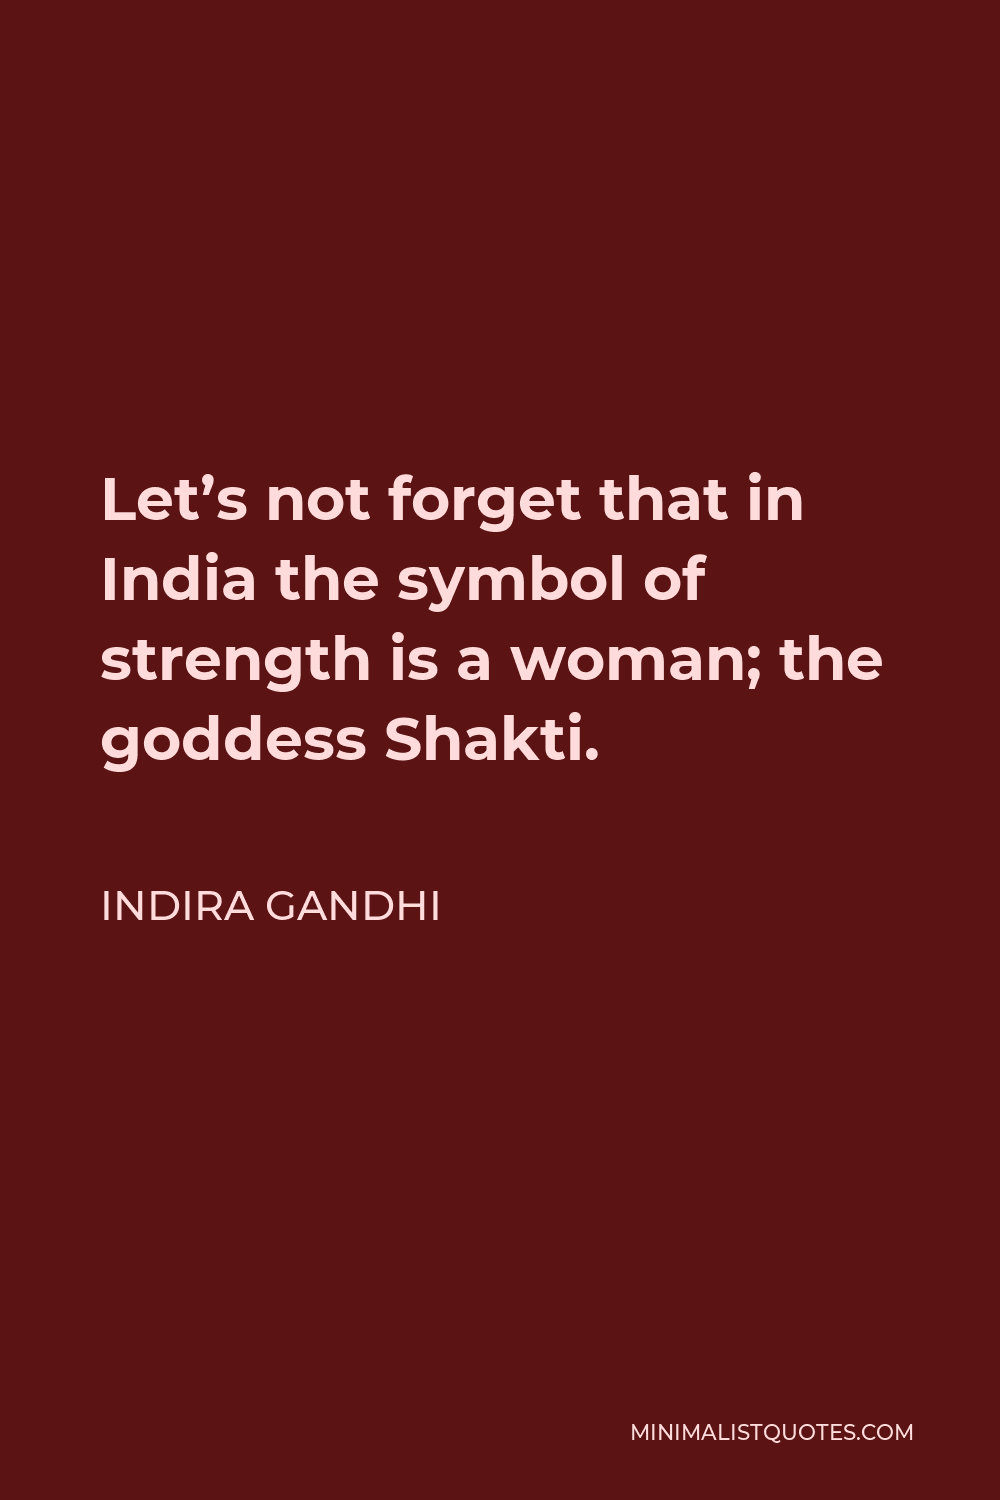 Indira Gandhi Quote - Let’s not forget that in India the symbol of strength is a woman; the goddess Shakti.